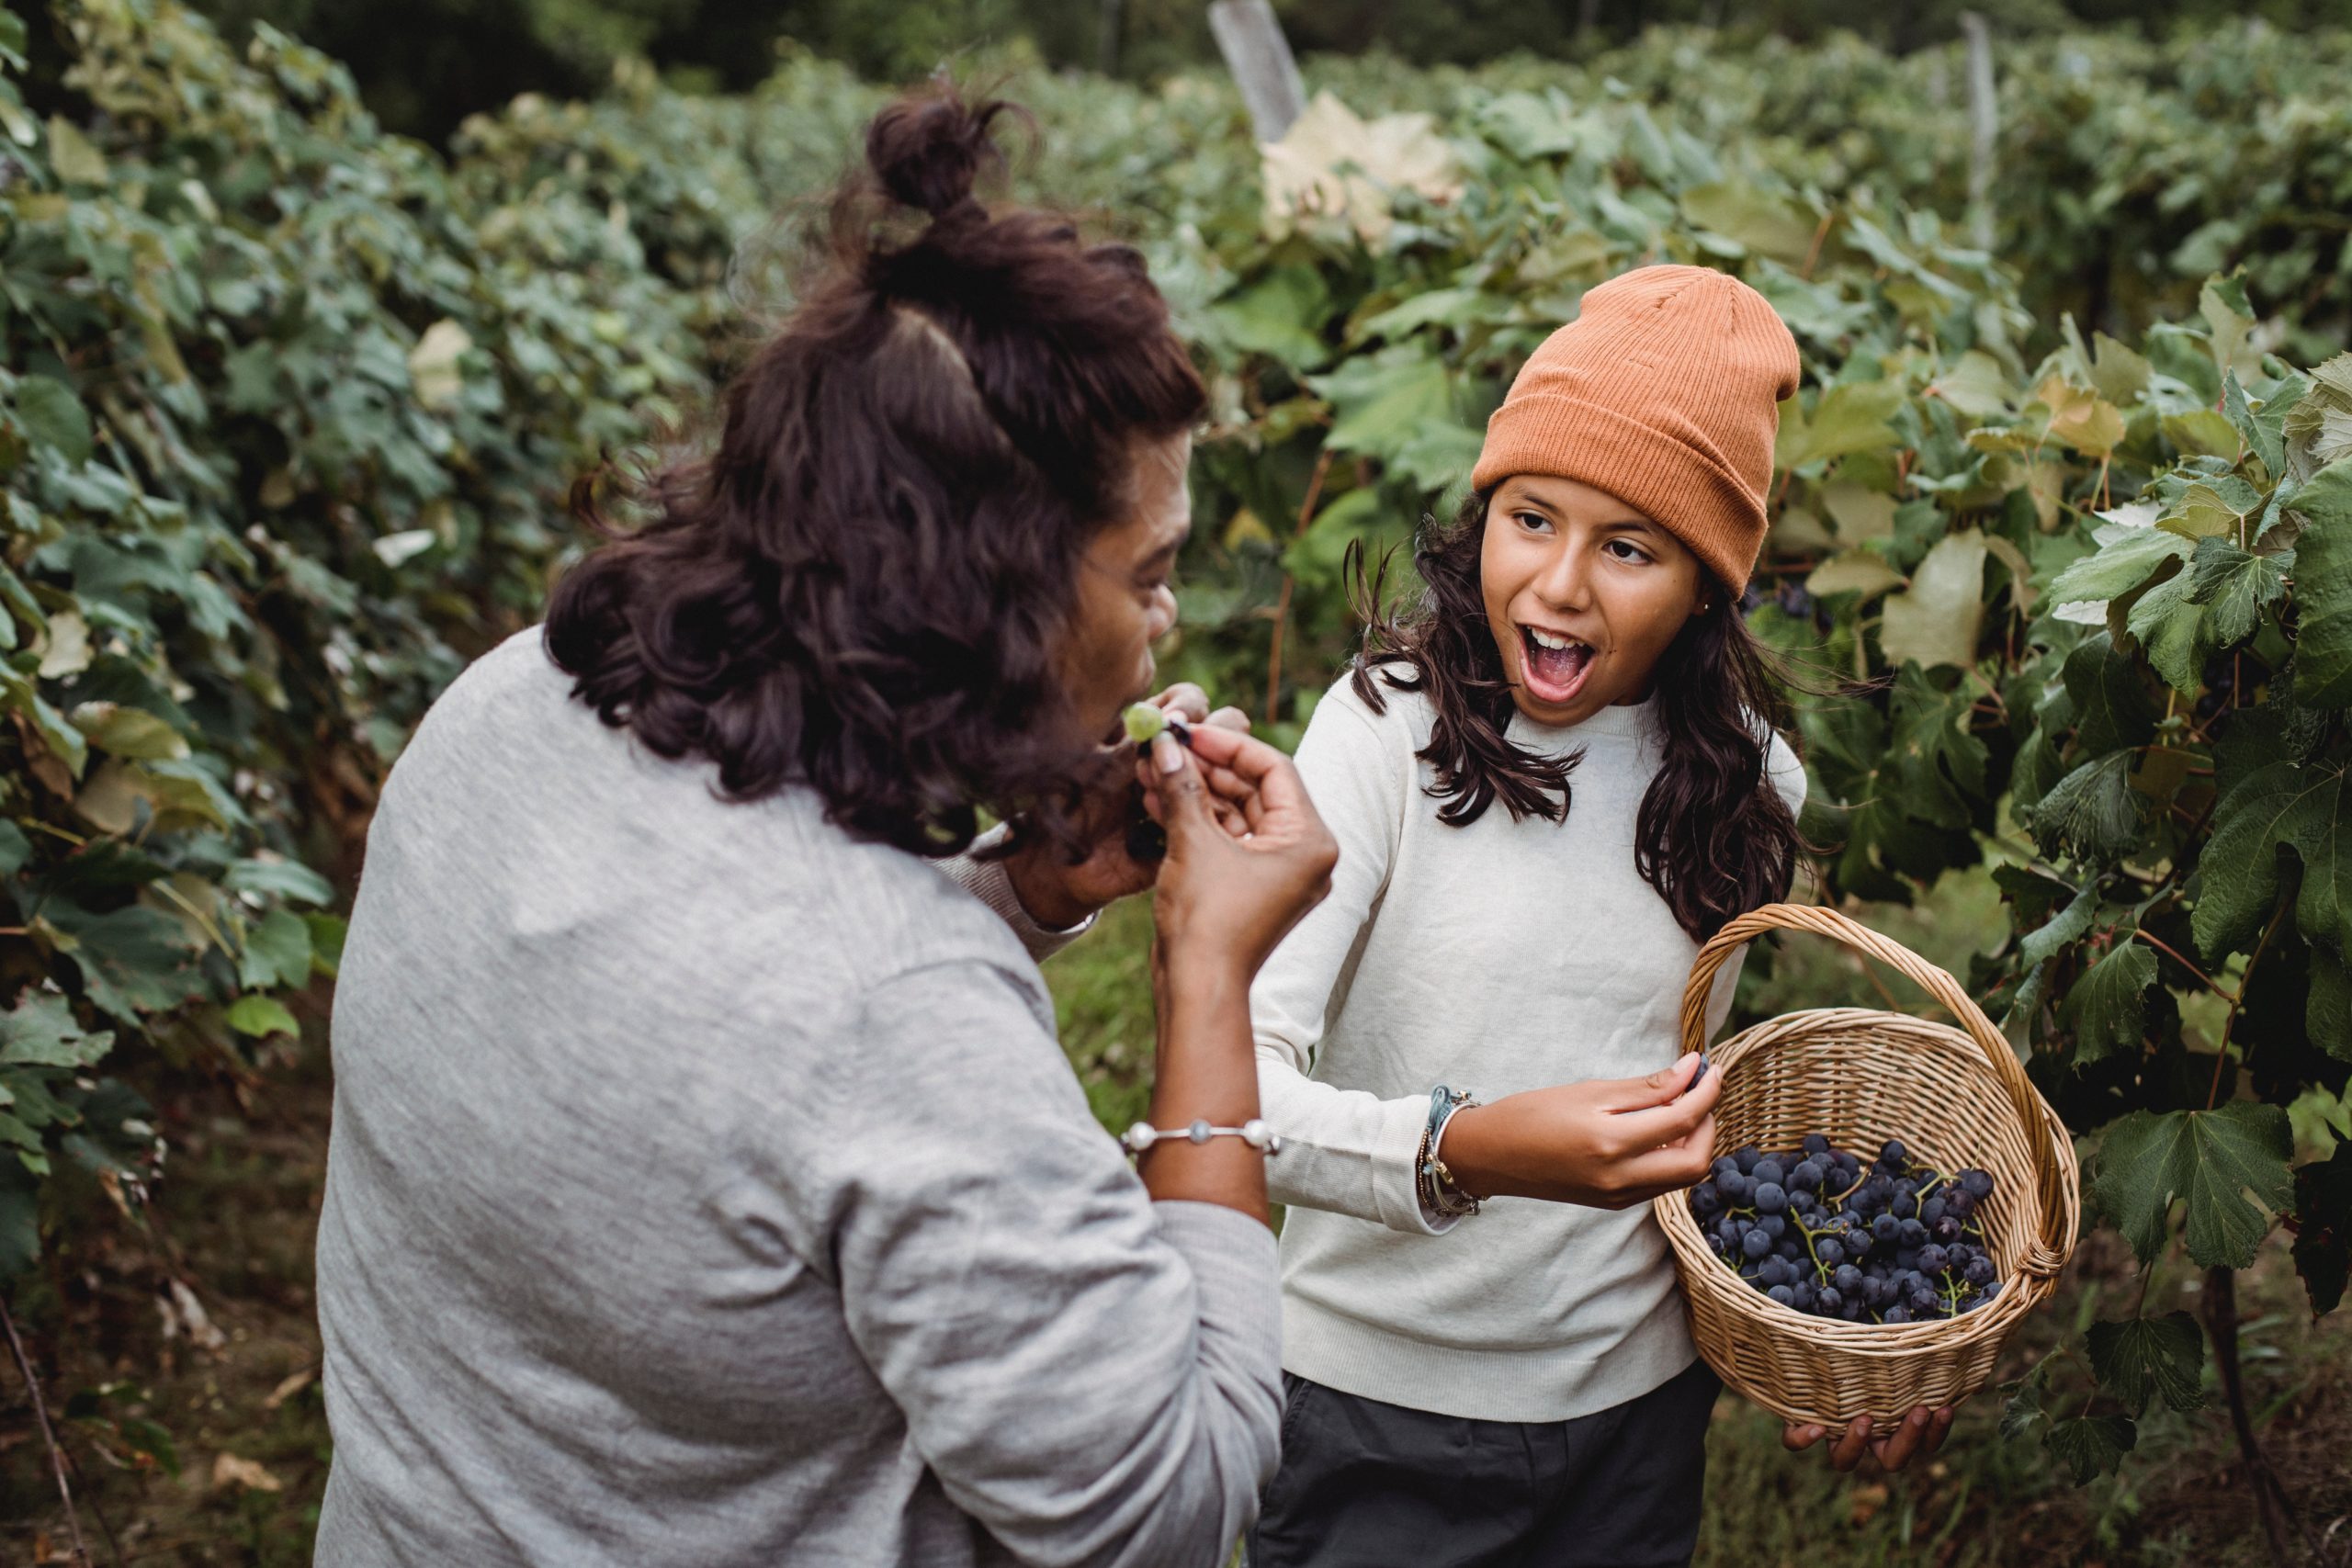 mom eating grape from daughter's basket of picked grapes in field